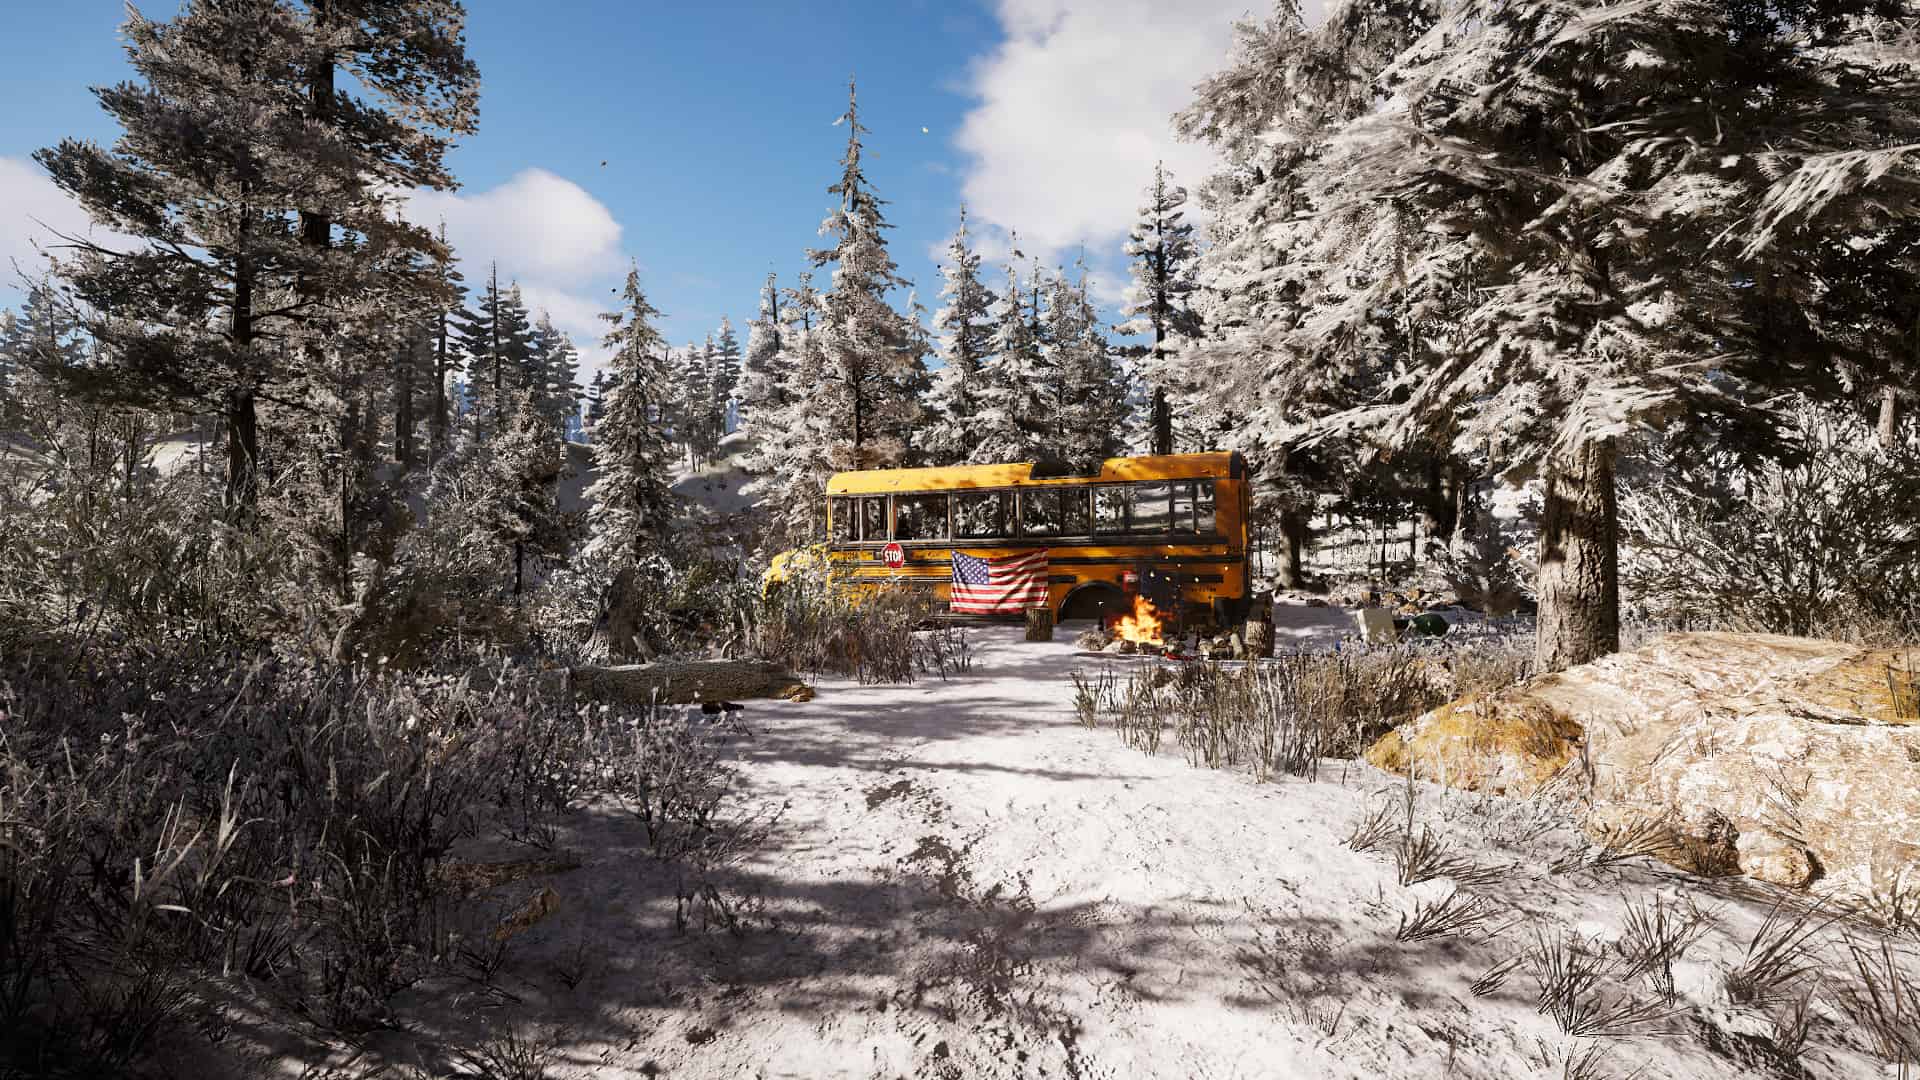 re download far cry 5 pc ubisoft